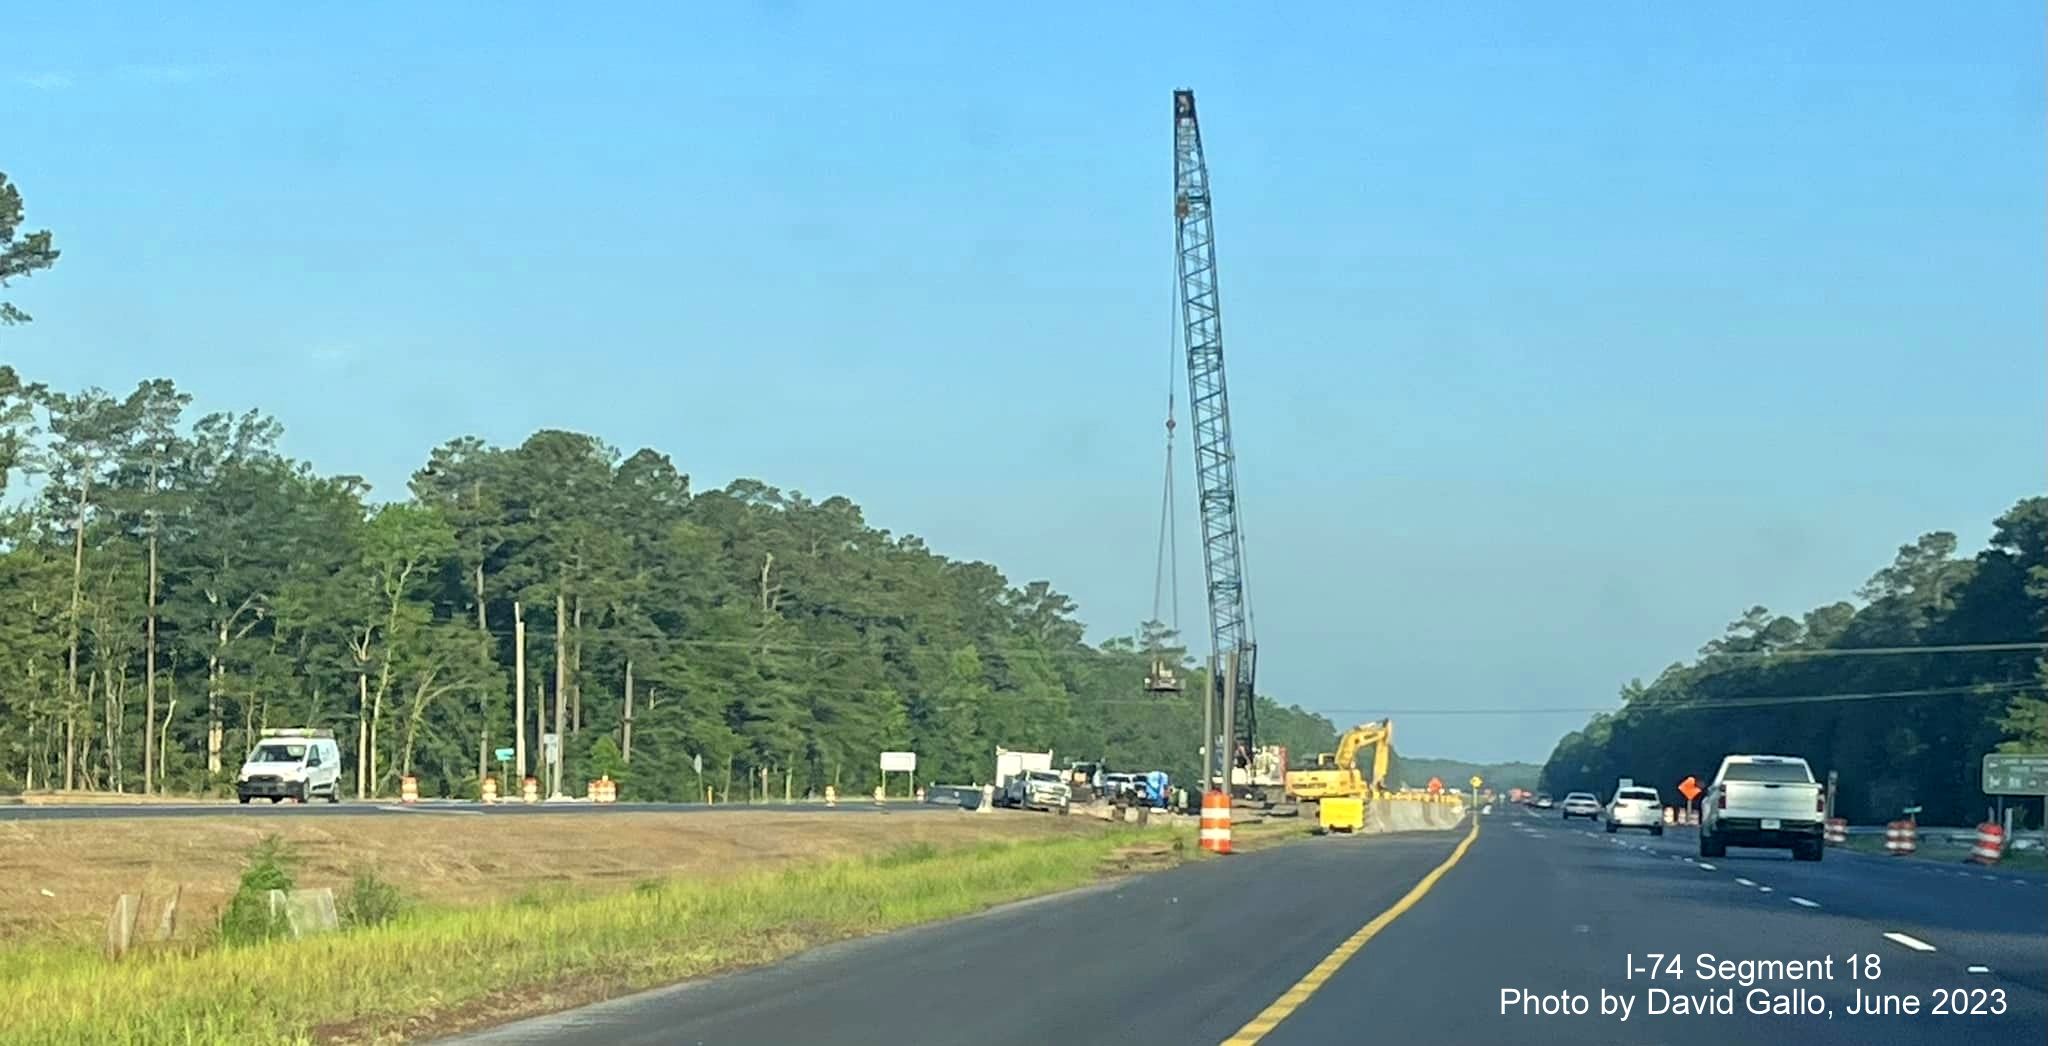 Image of construction crane in place at site of future Old Lake Road bridge seen from US 74/76 (Future I-74) East in Lake Waccamaw, David Gallo, June 2023